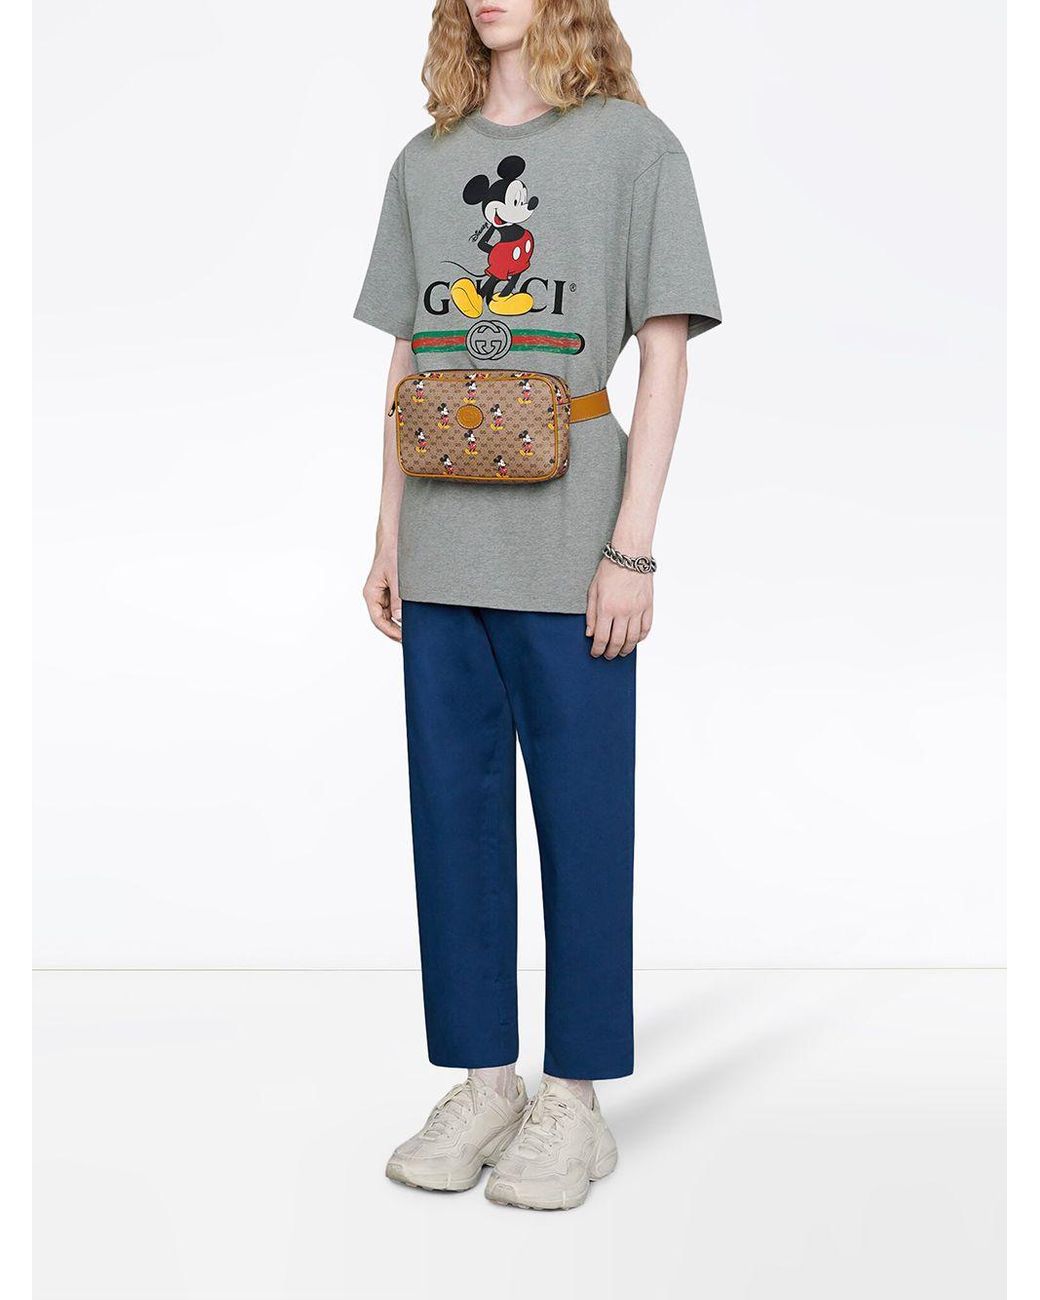 Gucci - x Disney Mickey Mouse Small Belt pouch - Catawiki